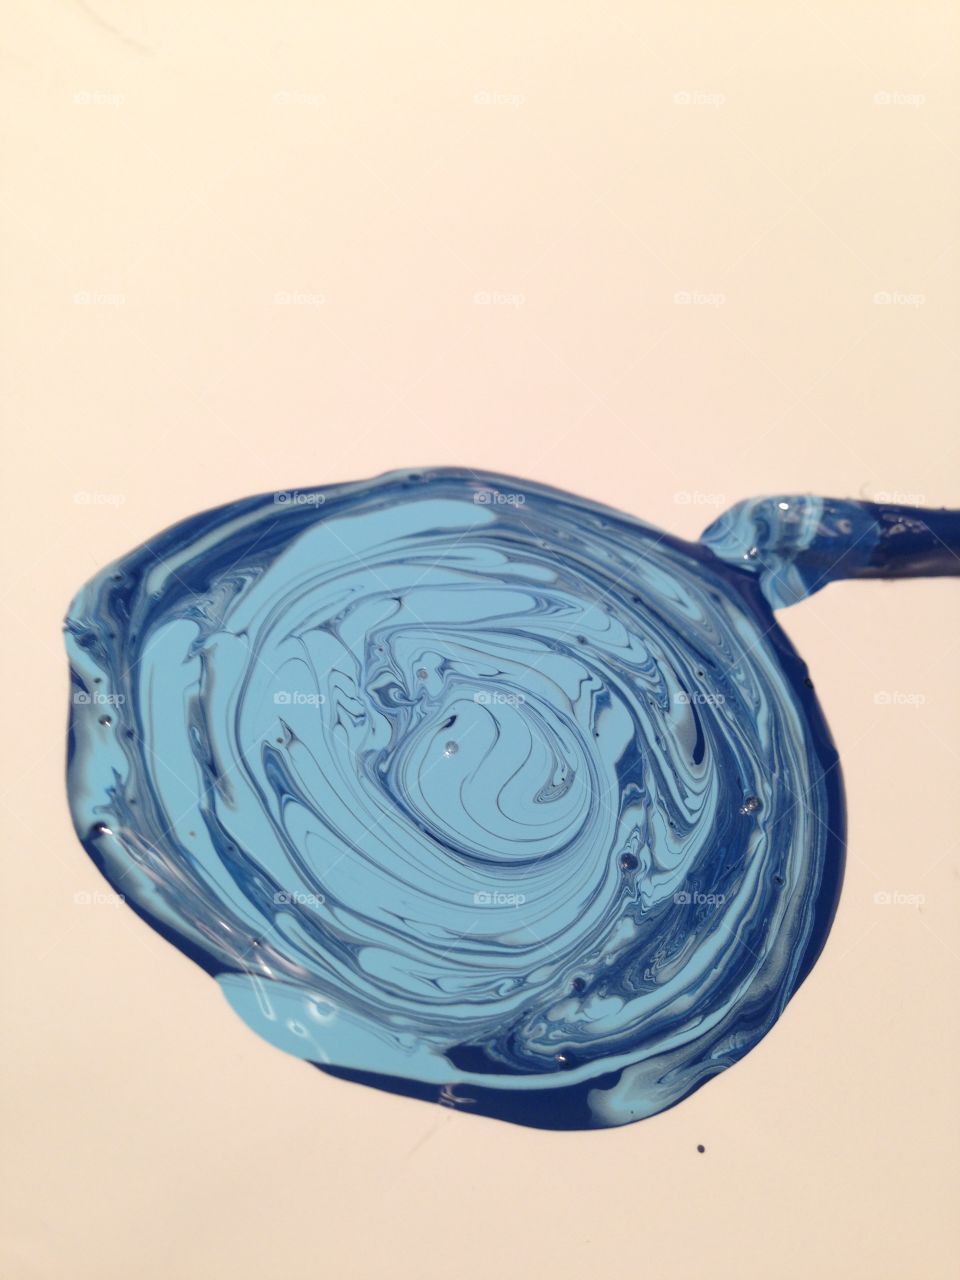 Blue. I was painting a pumpkin and while mixing colors I decided to snap a pic